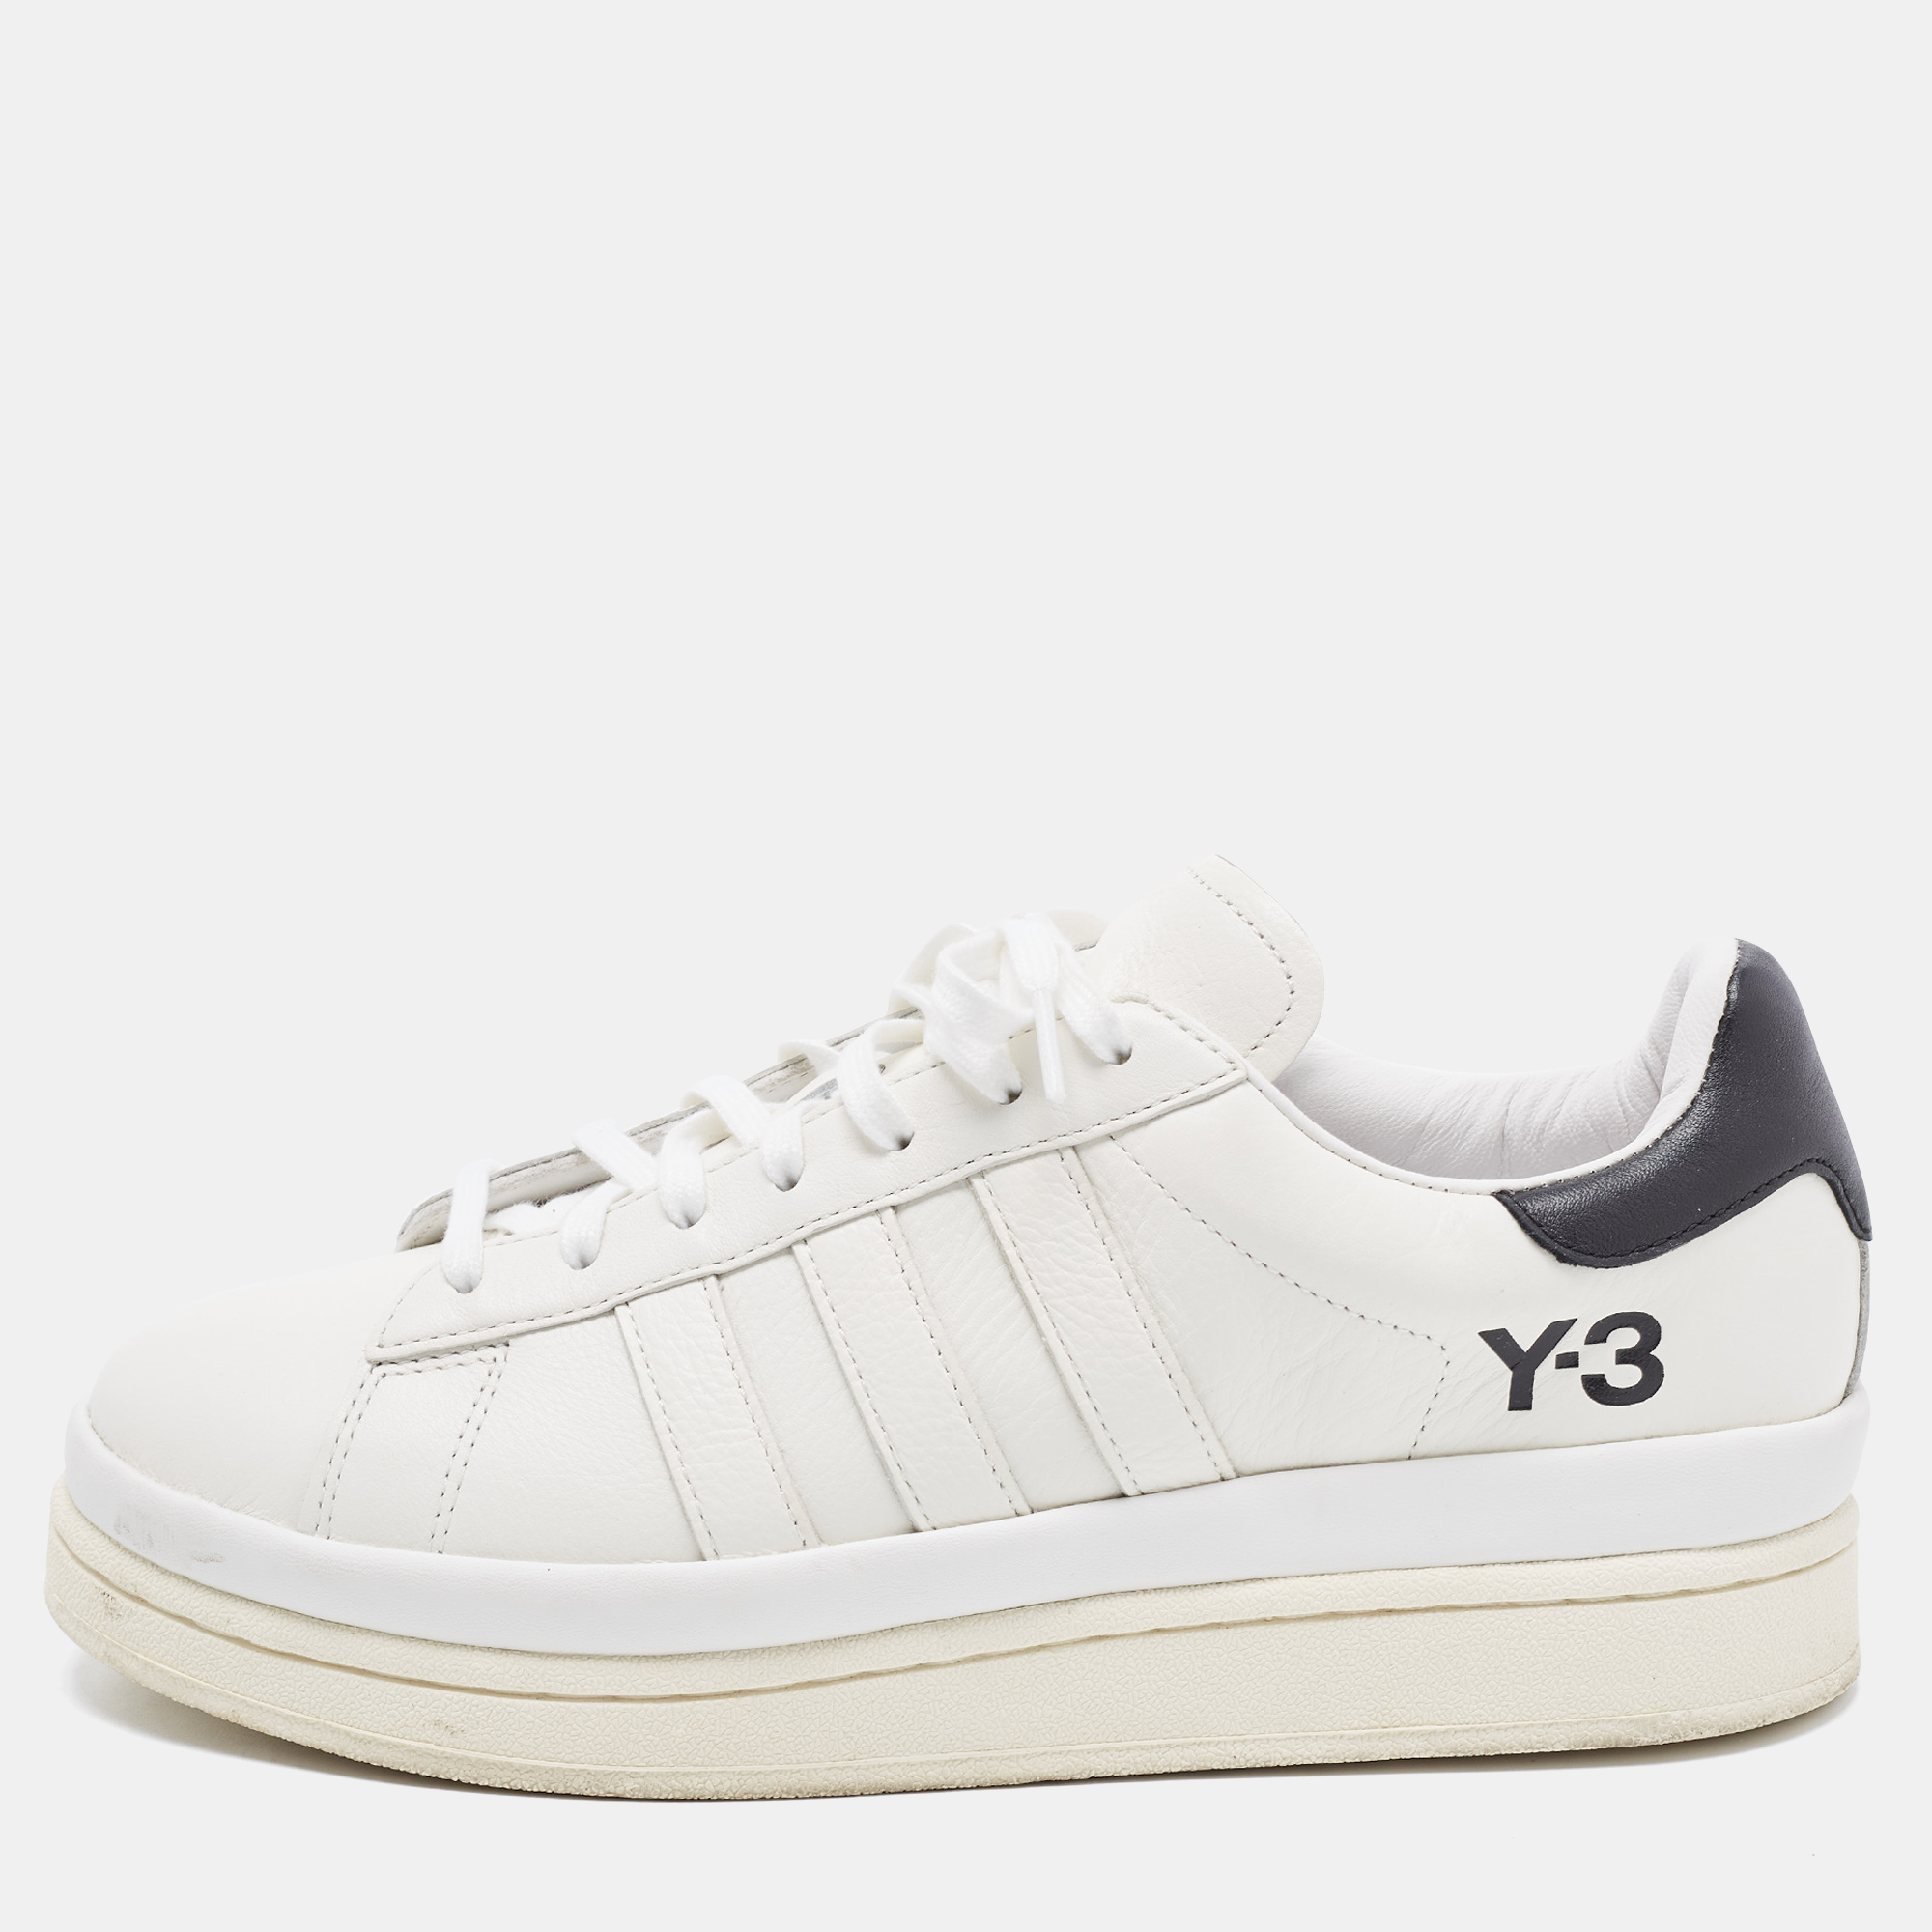 Pre-owned Y-3 White/black Leather Yohji Star Low-top Sneakers Size 42 2/3